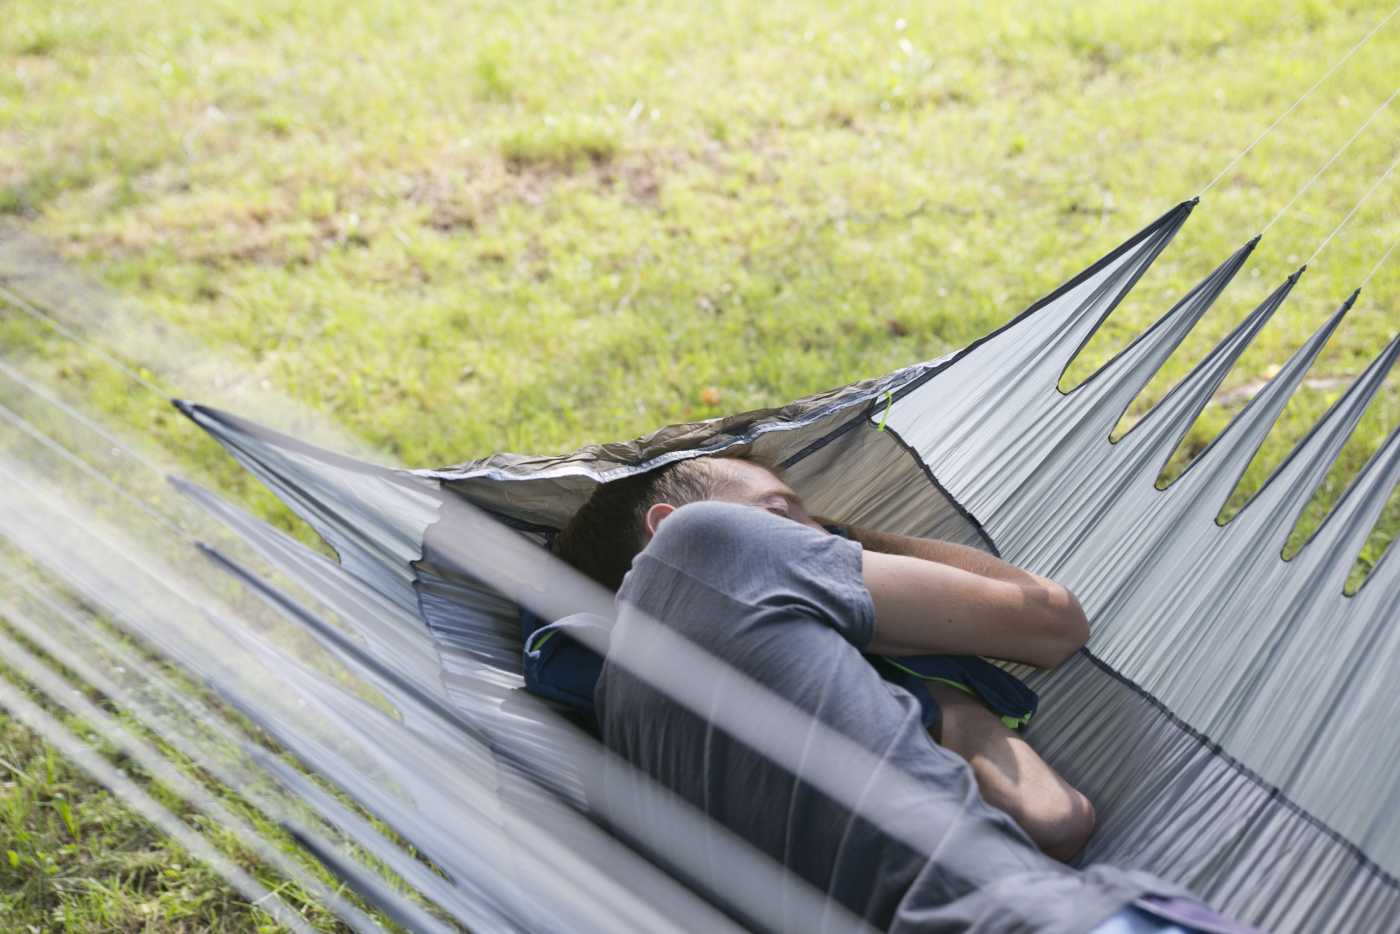 A hammock you can comfortably sleep a whole night in, even on your side!